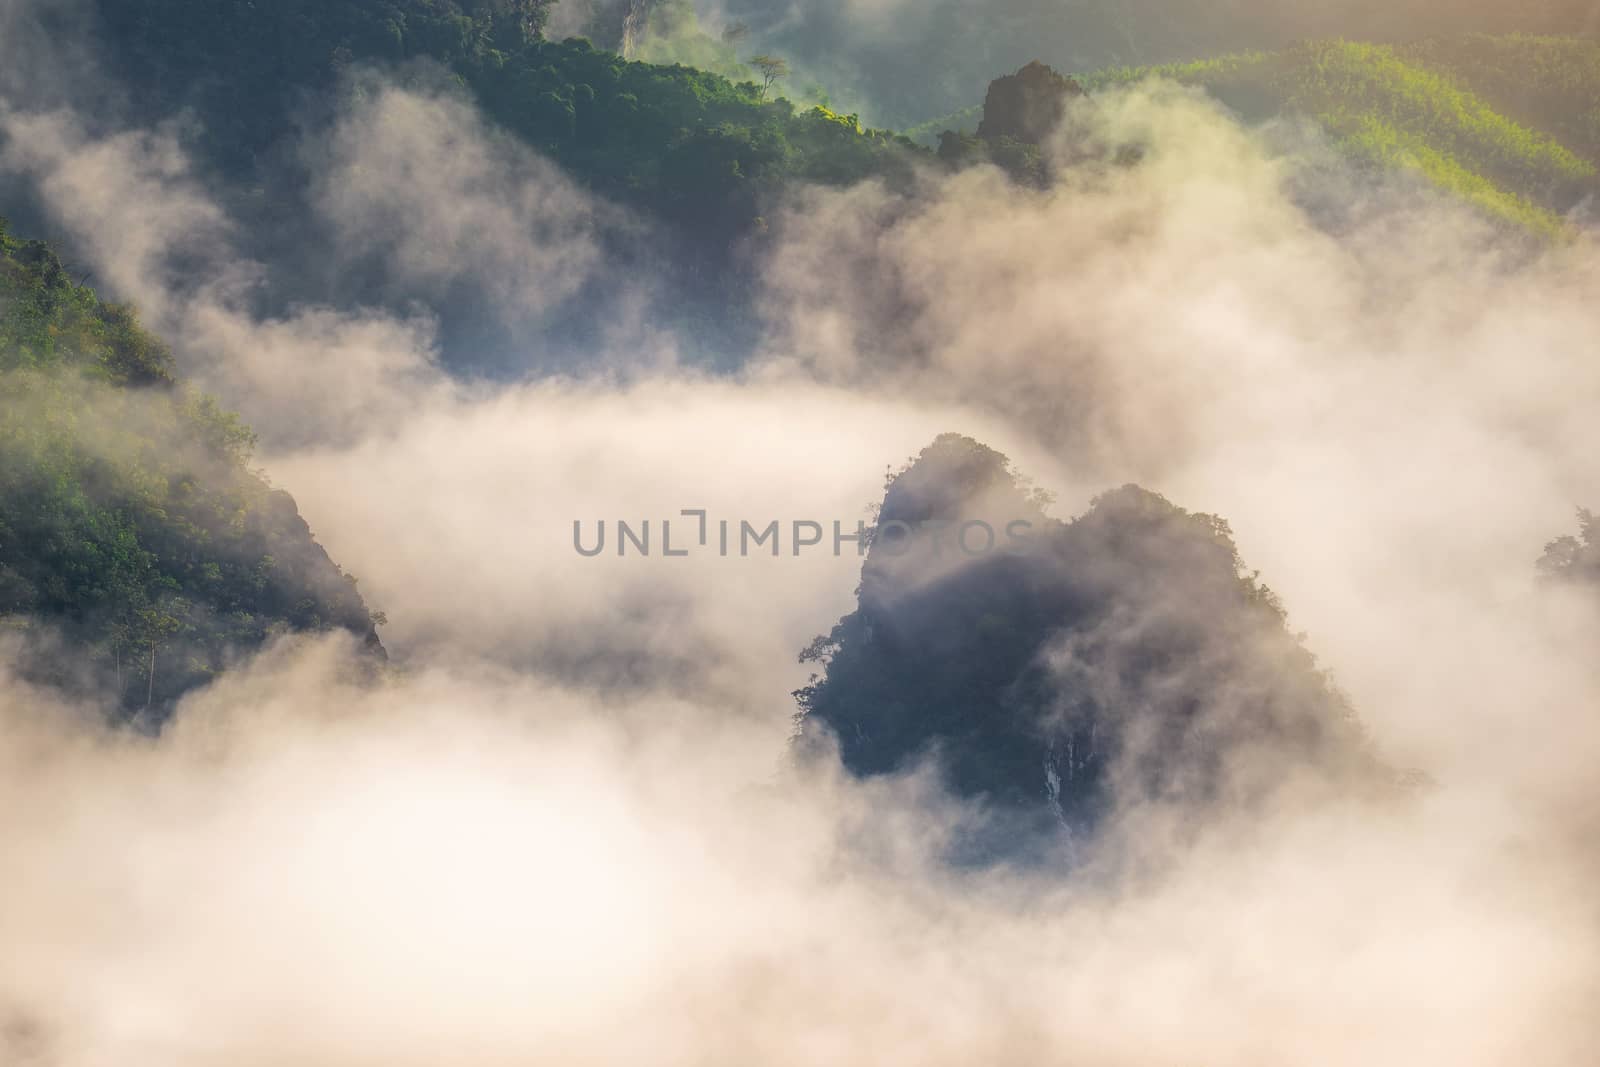 Morning mist over mountains. by gutarphotoghaphy